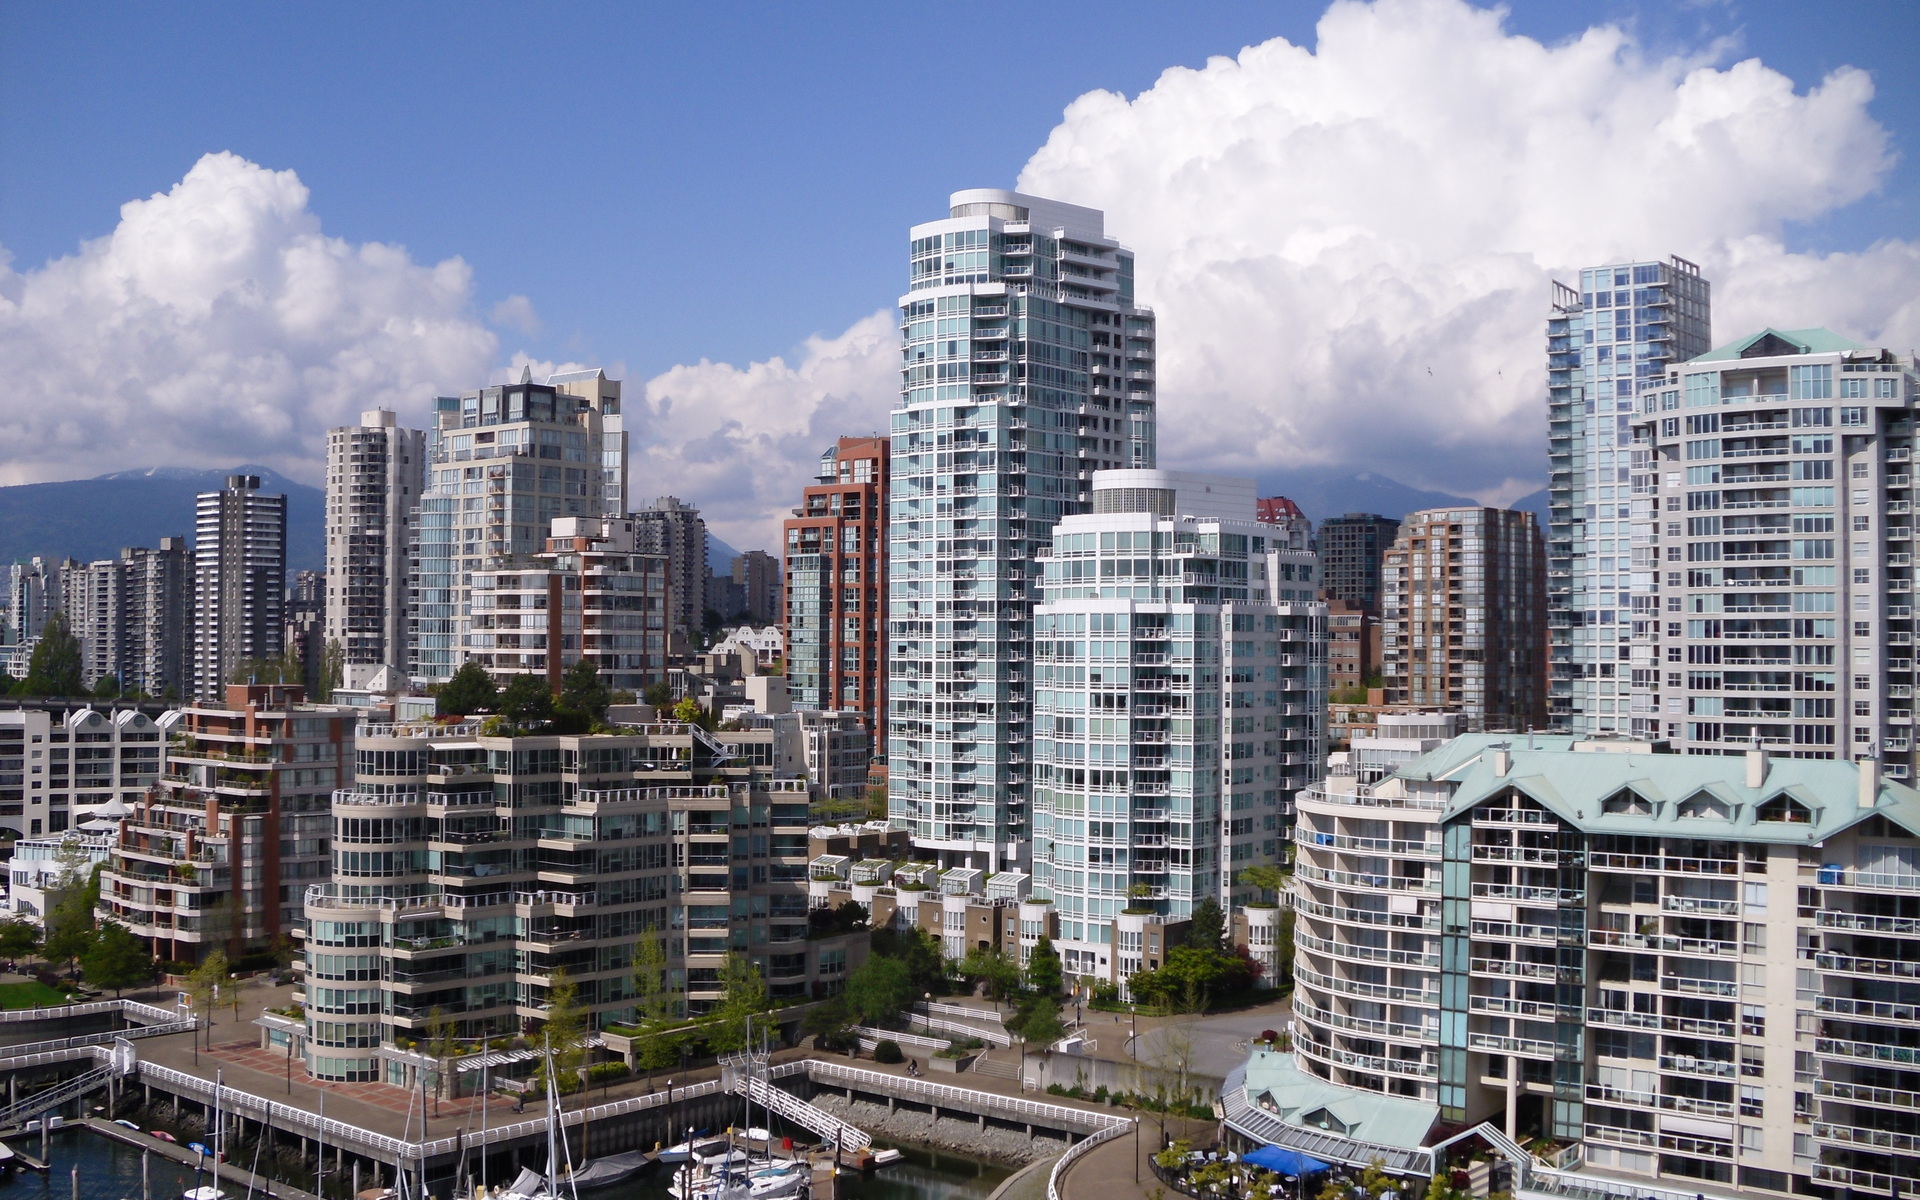 man made, vancouver, architecture, building, canada, place, skyscraper, cities